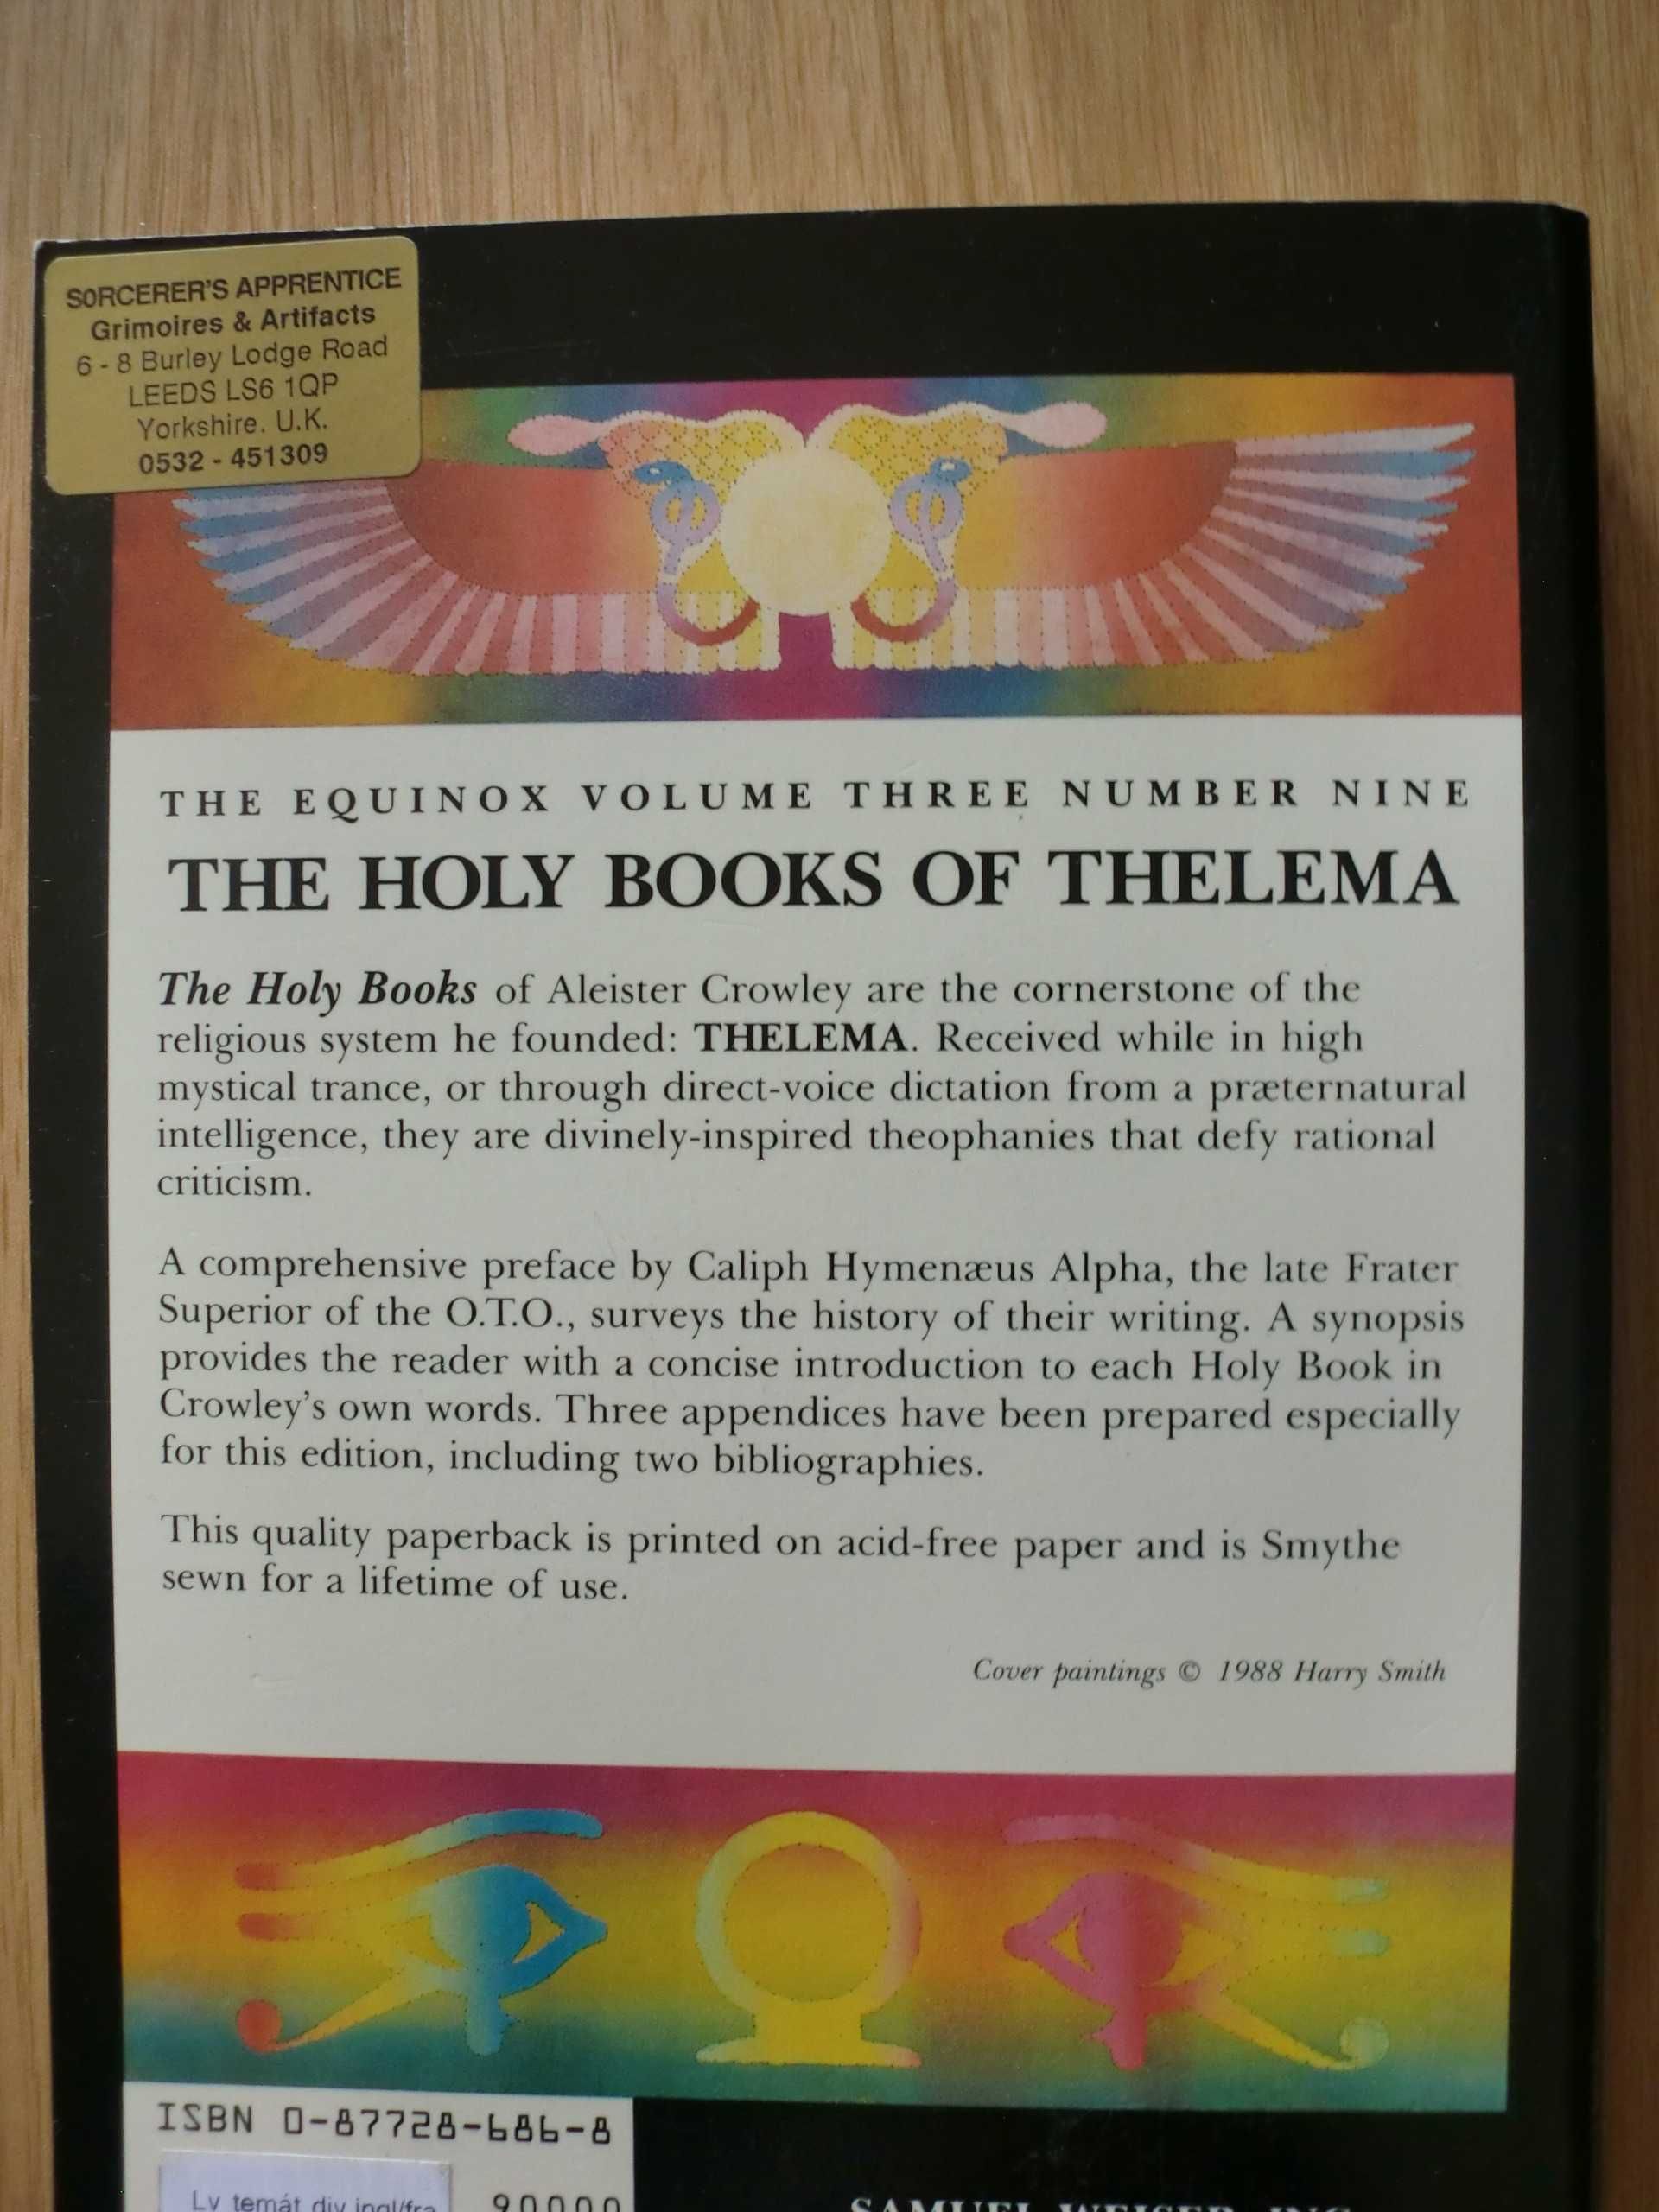 The Holy Books of Thelema
by Aleister Crowley